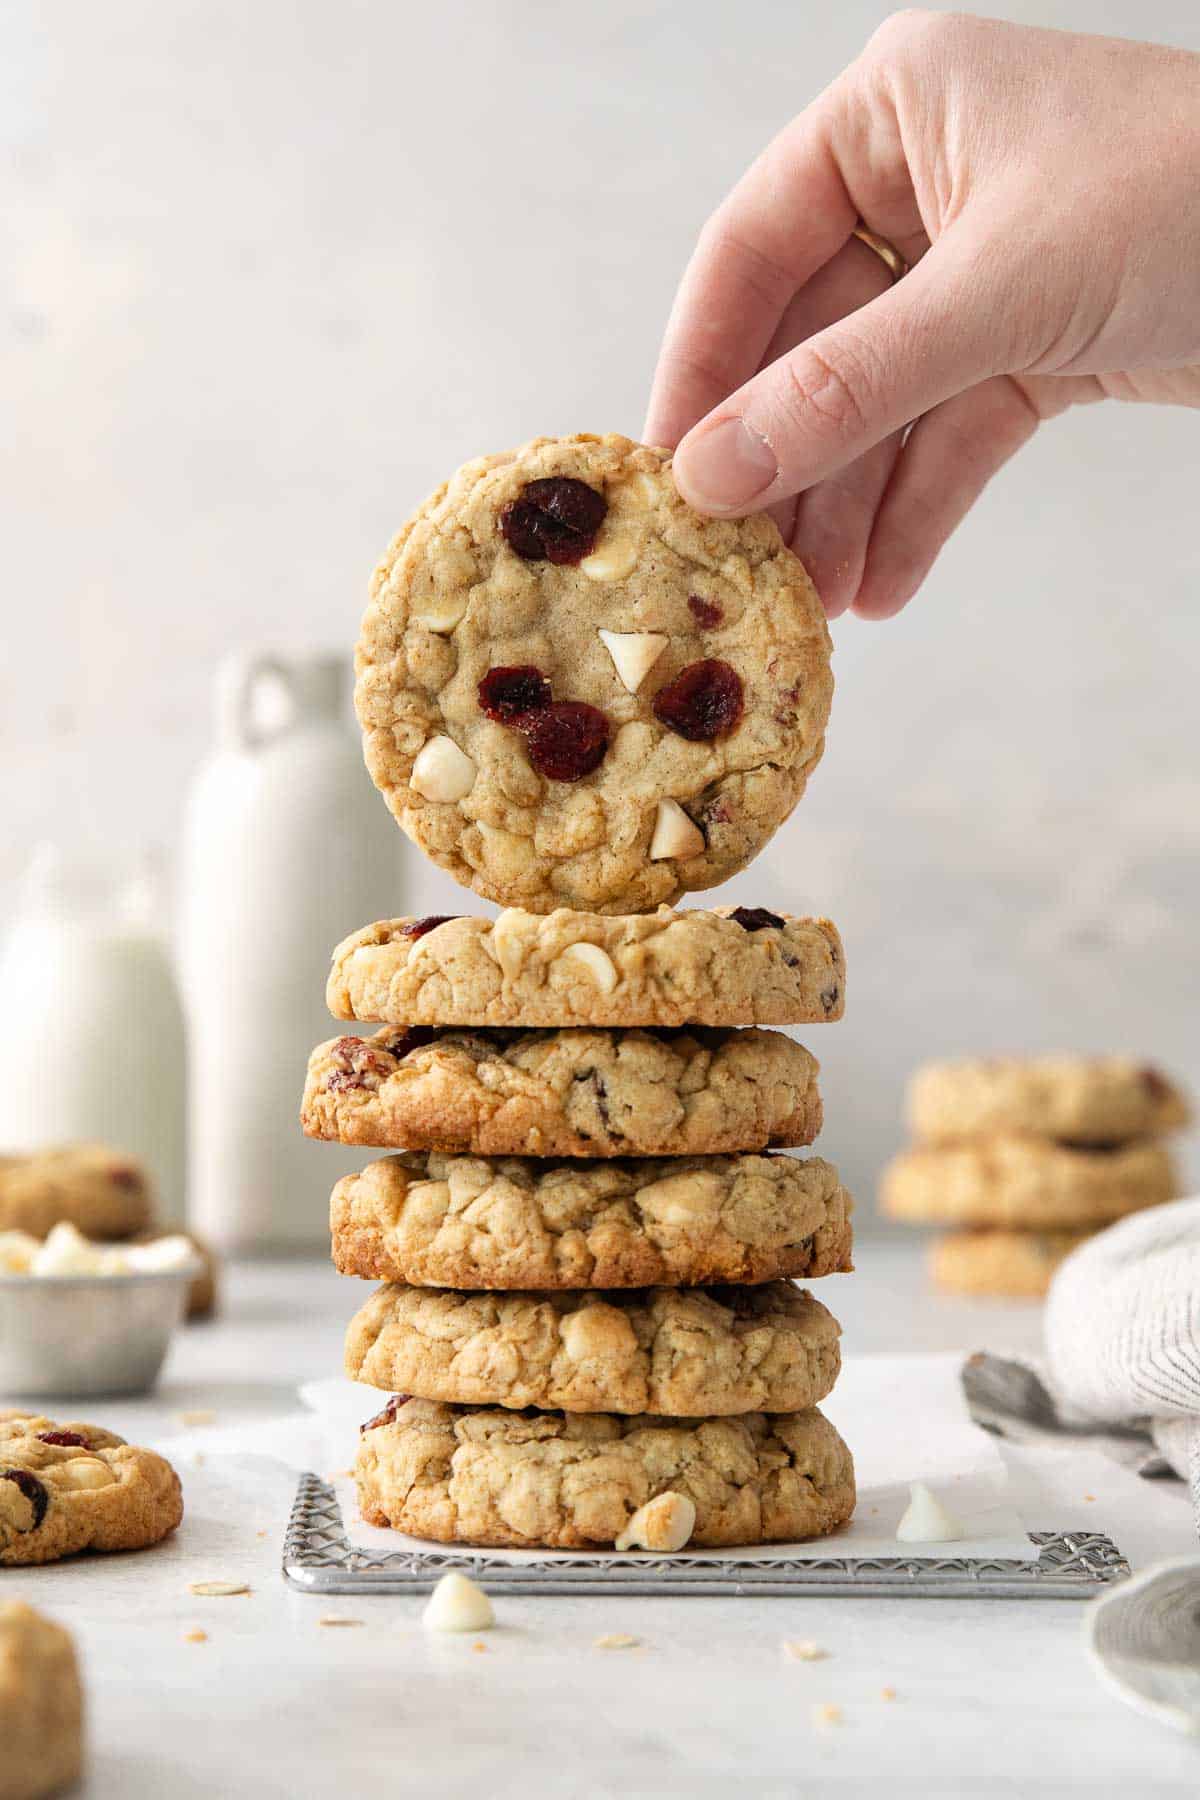 A stack of gluten-free white chocolate cranberry cookies on a countertop with a hand picking up the top cookie